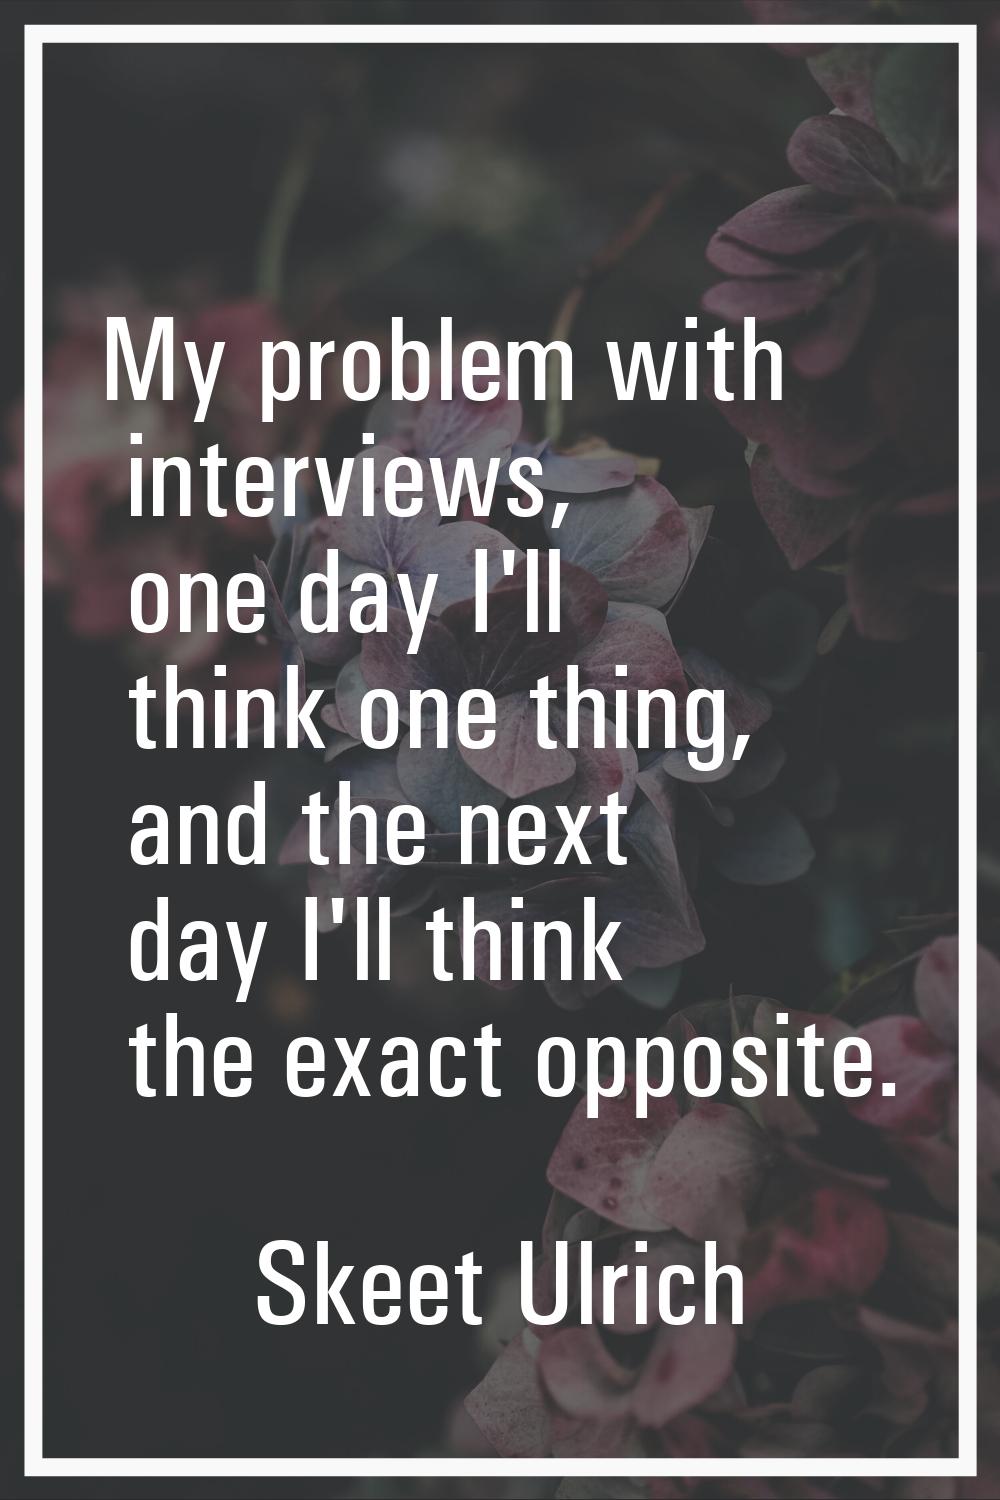 My problem with interviews, one day I'll think one thing, and the next day I'll think the exact opp